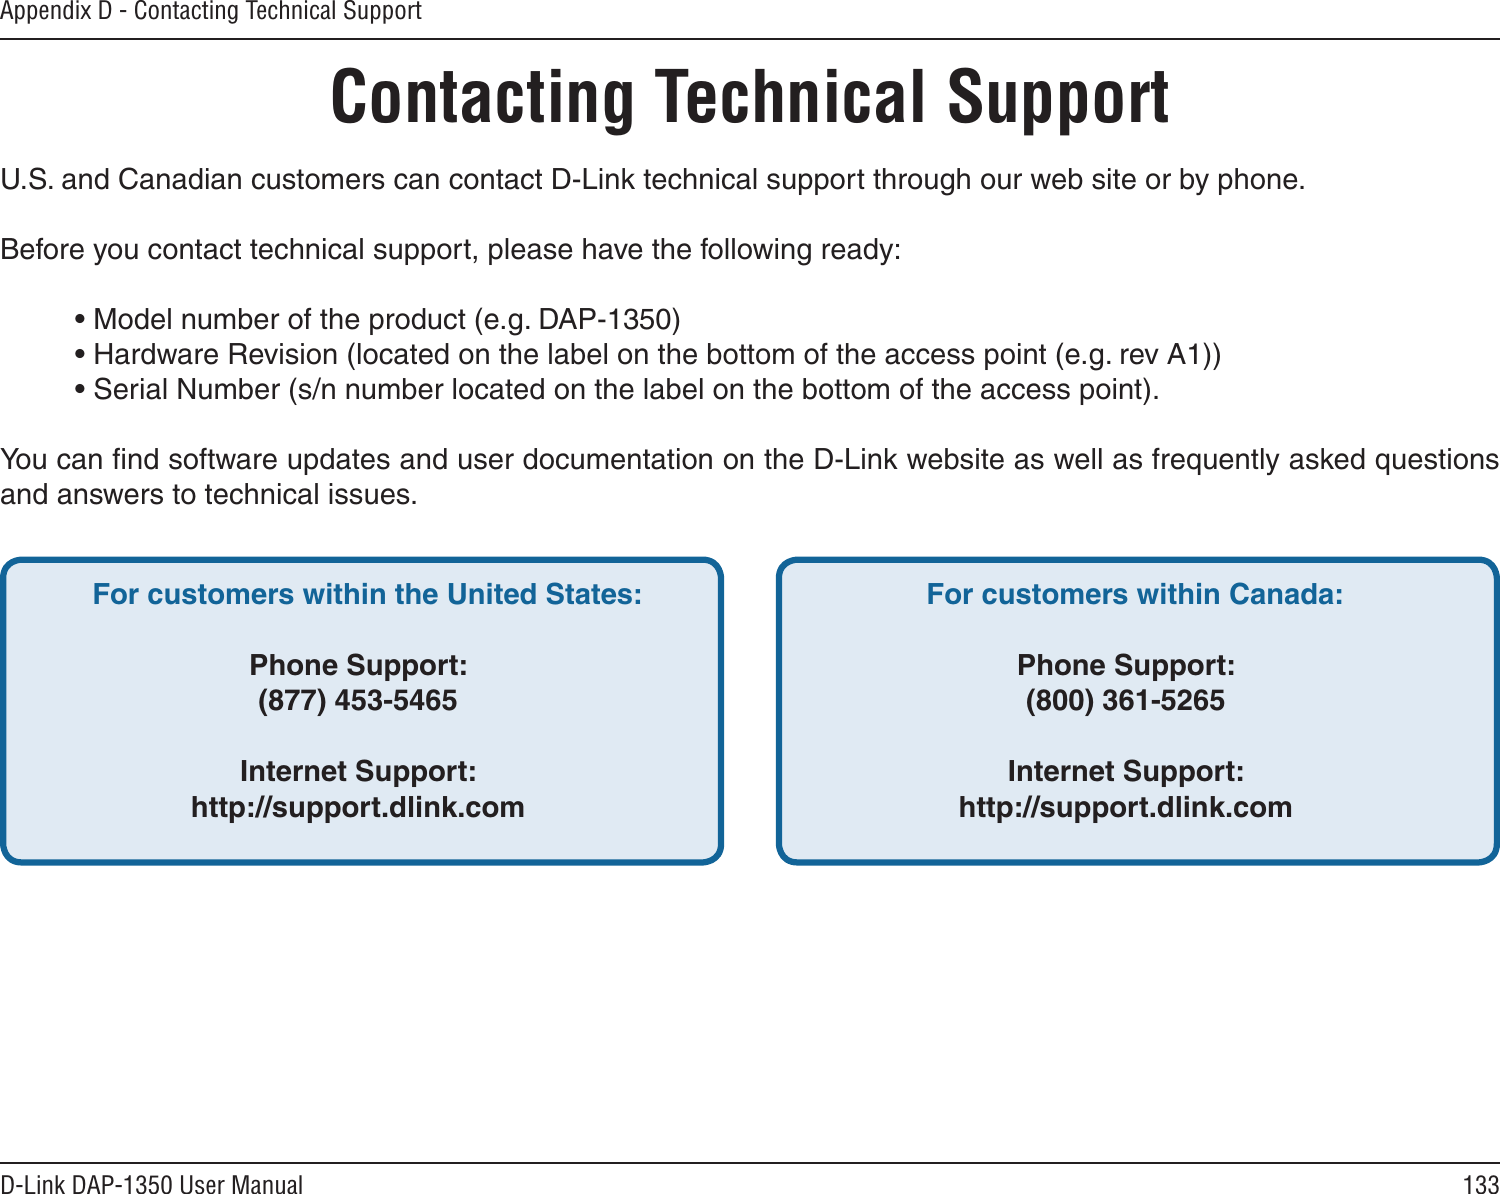 133D-Link DAP-1350 User ManualAppendix D - Contacting Technical SupportContacting Technical SupportU.S. and Canadian customers can contact D-Link technical support through our web site or by phone.Before you contact technical support, please have the following ready:  • Model number of the product (e.g. DAP-1350)  • Hardware Revision (located on the label on the bottom of the access point (e.g. rev A1))  • Serial Number (s/n number located on the label on the bottom of the access point). You can ﬁnd software updates and user documentation on the D-Link website as well as frequently asked questions and answers to technical issues.For customers within the United States: Phone Support:(877) 453-5465Internet Support:http://support.dlink.com For customers within Canada: Phone Support:(800) 361-5265 Internet Support:http://support.dlink.com